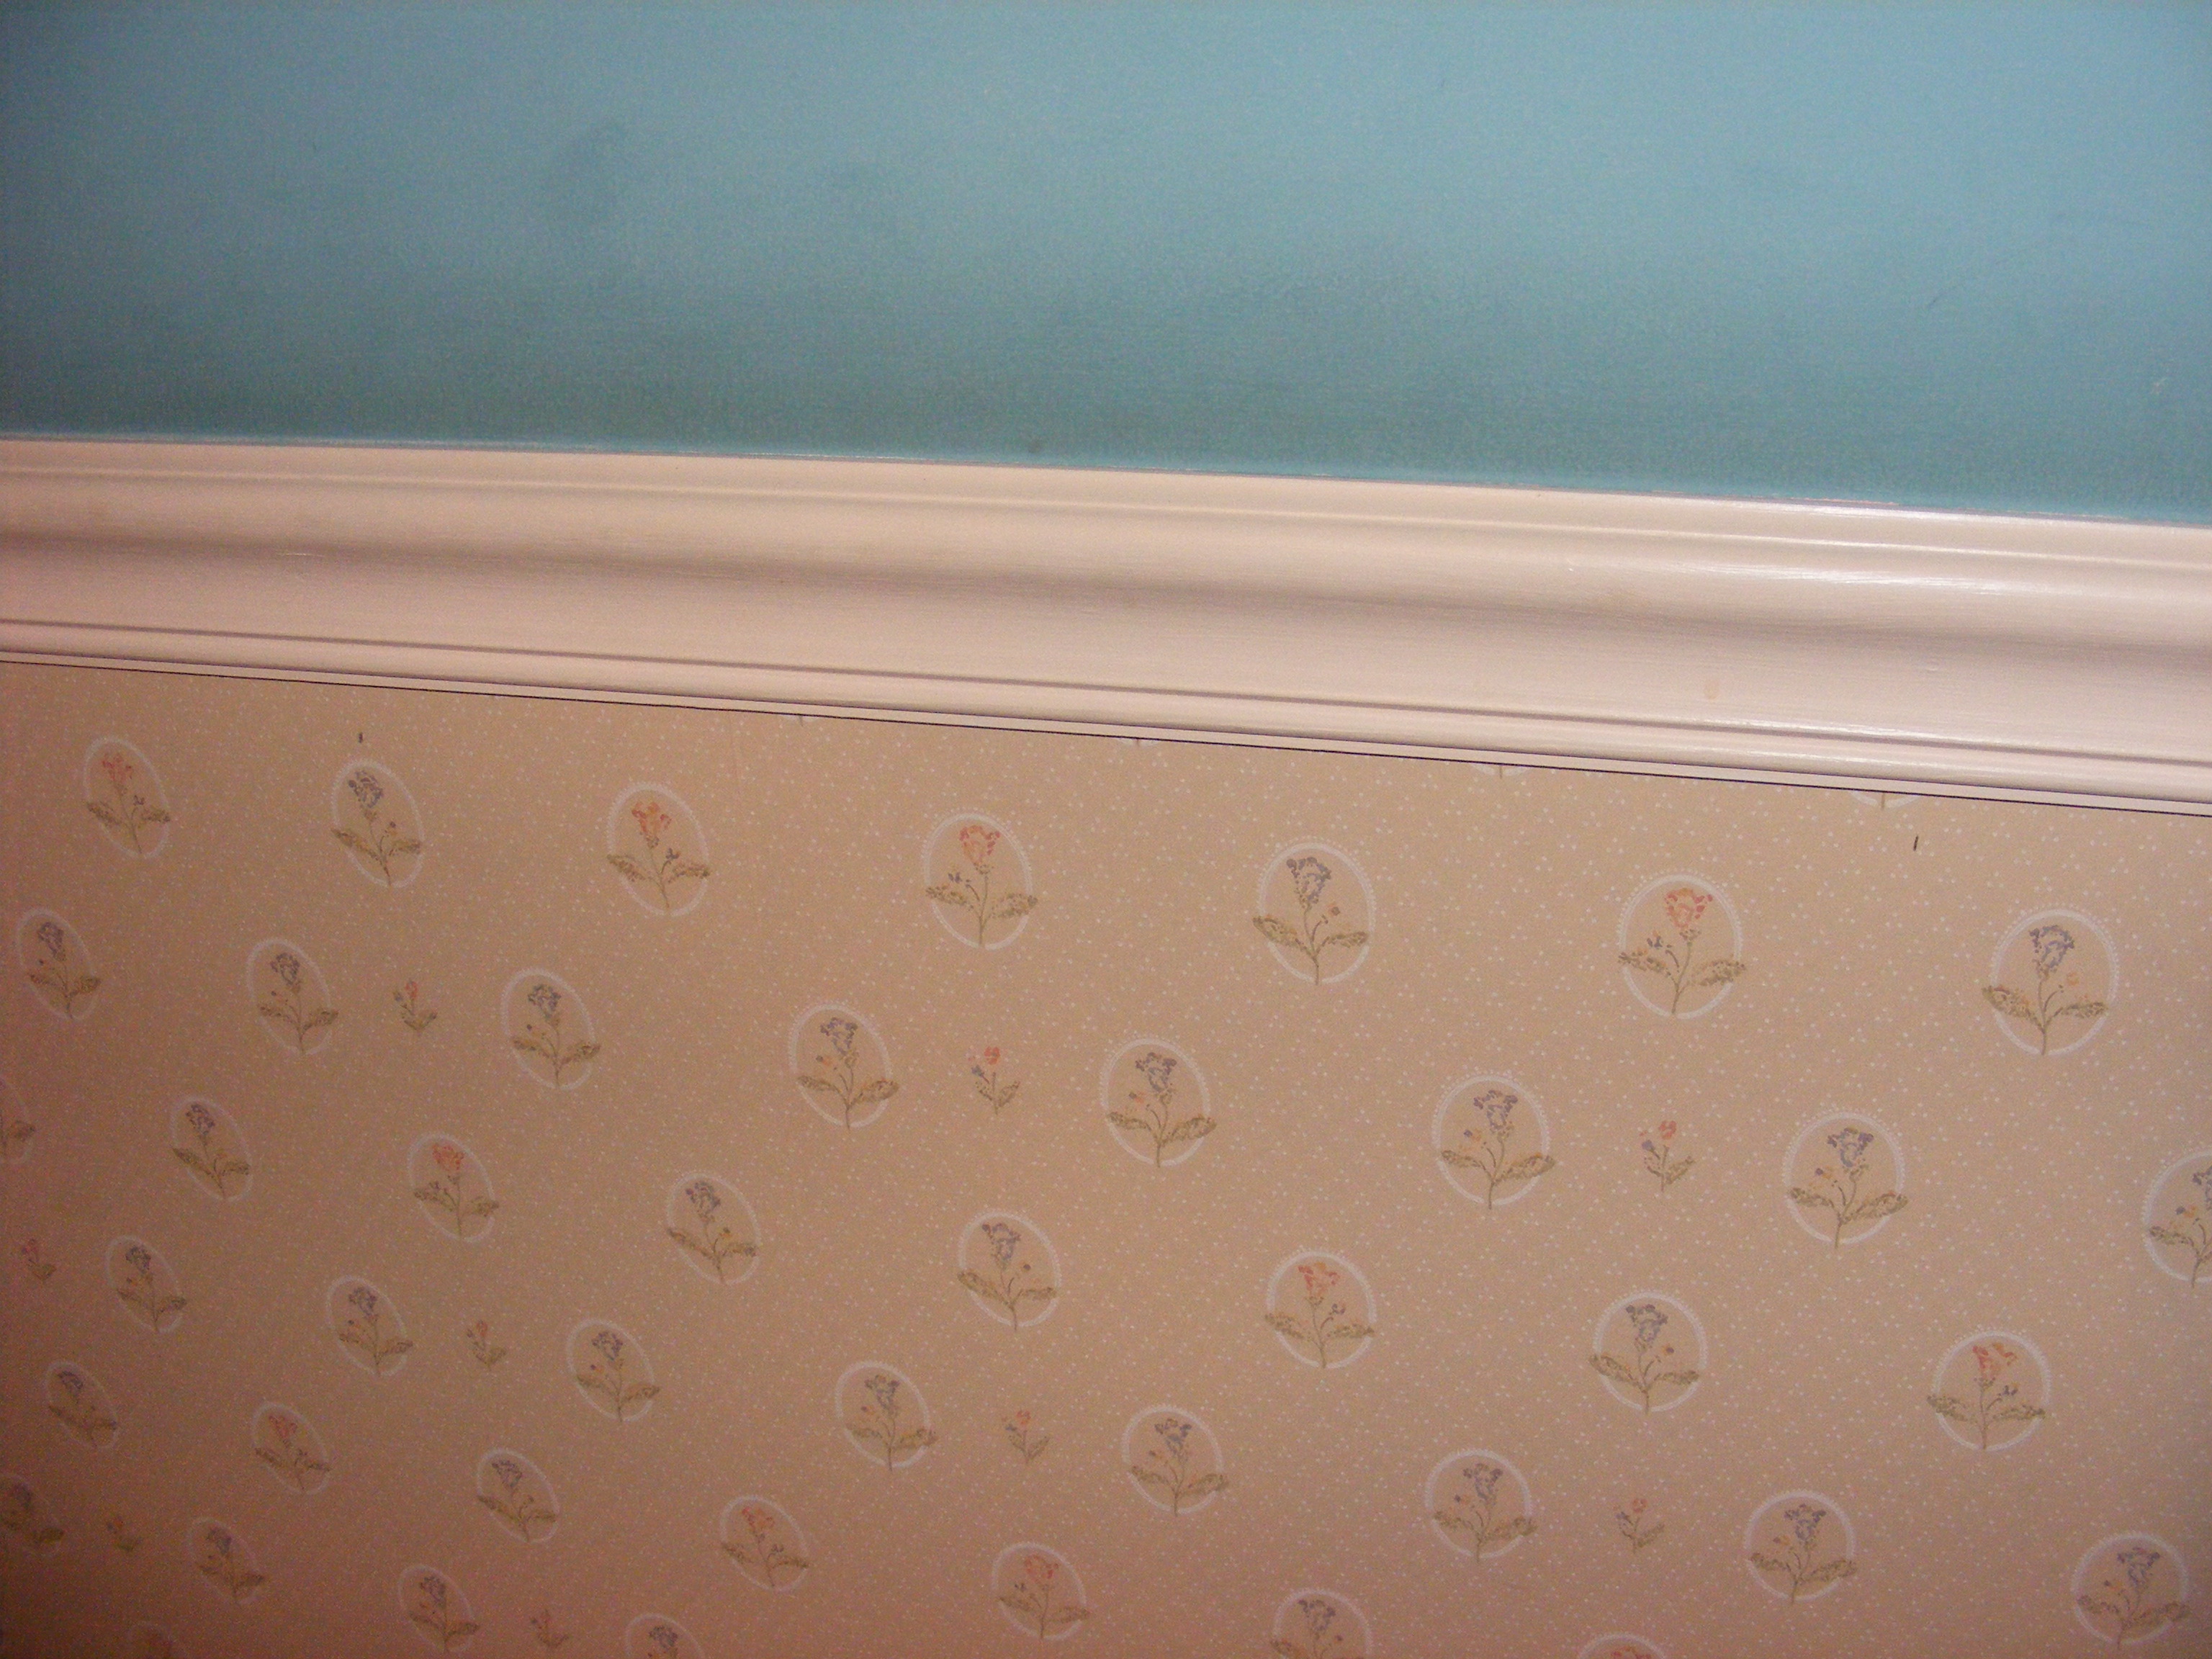 Wallpaper Below The Chair Rail And Teal Paint Color